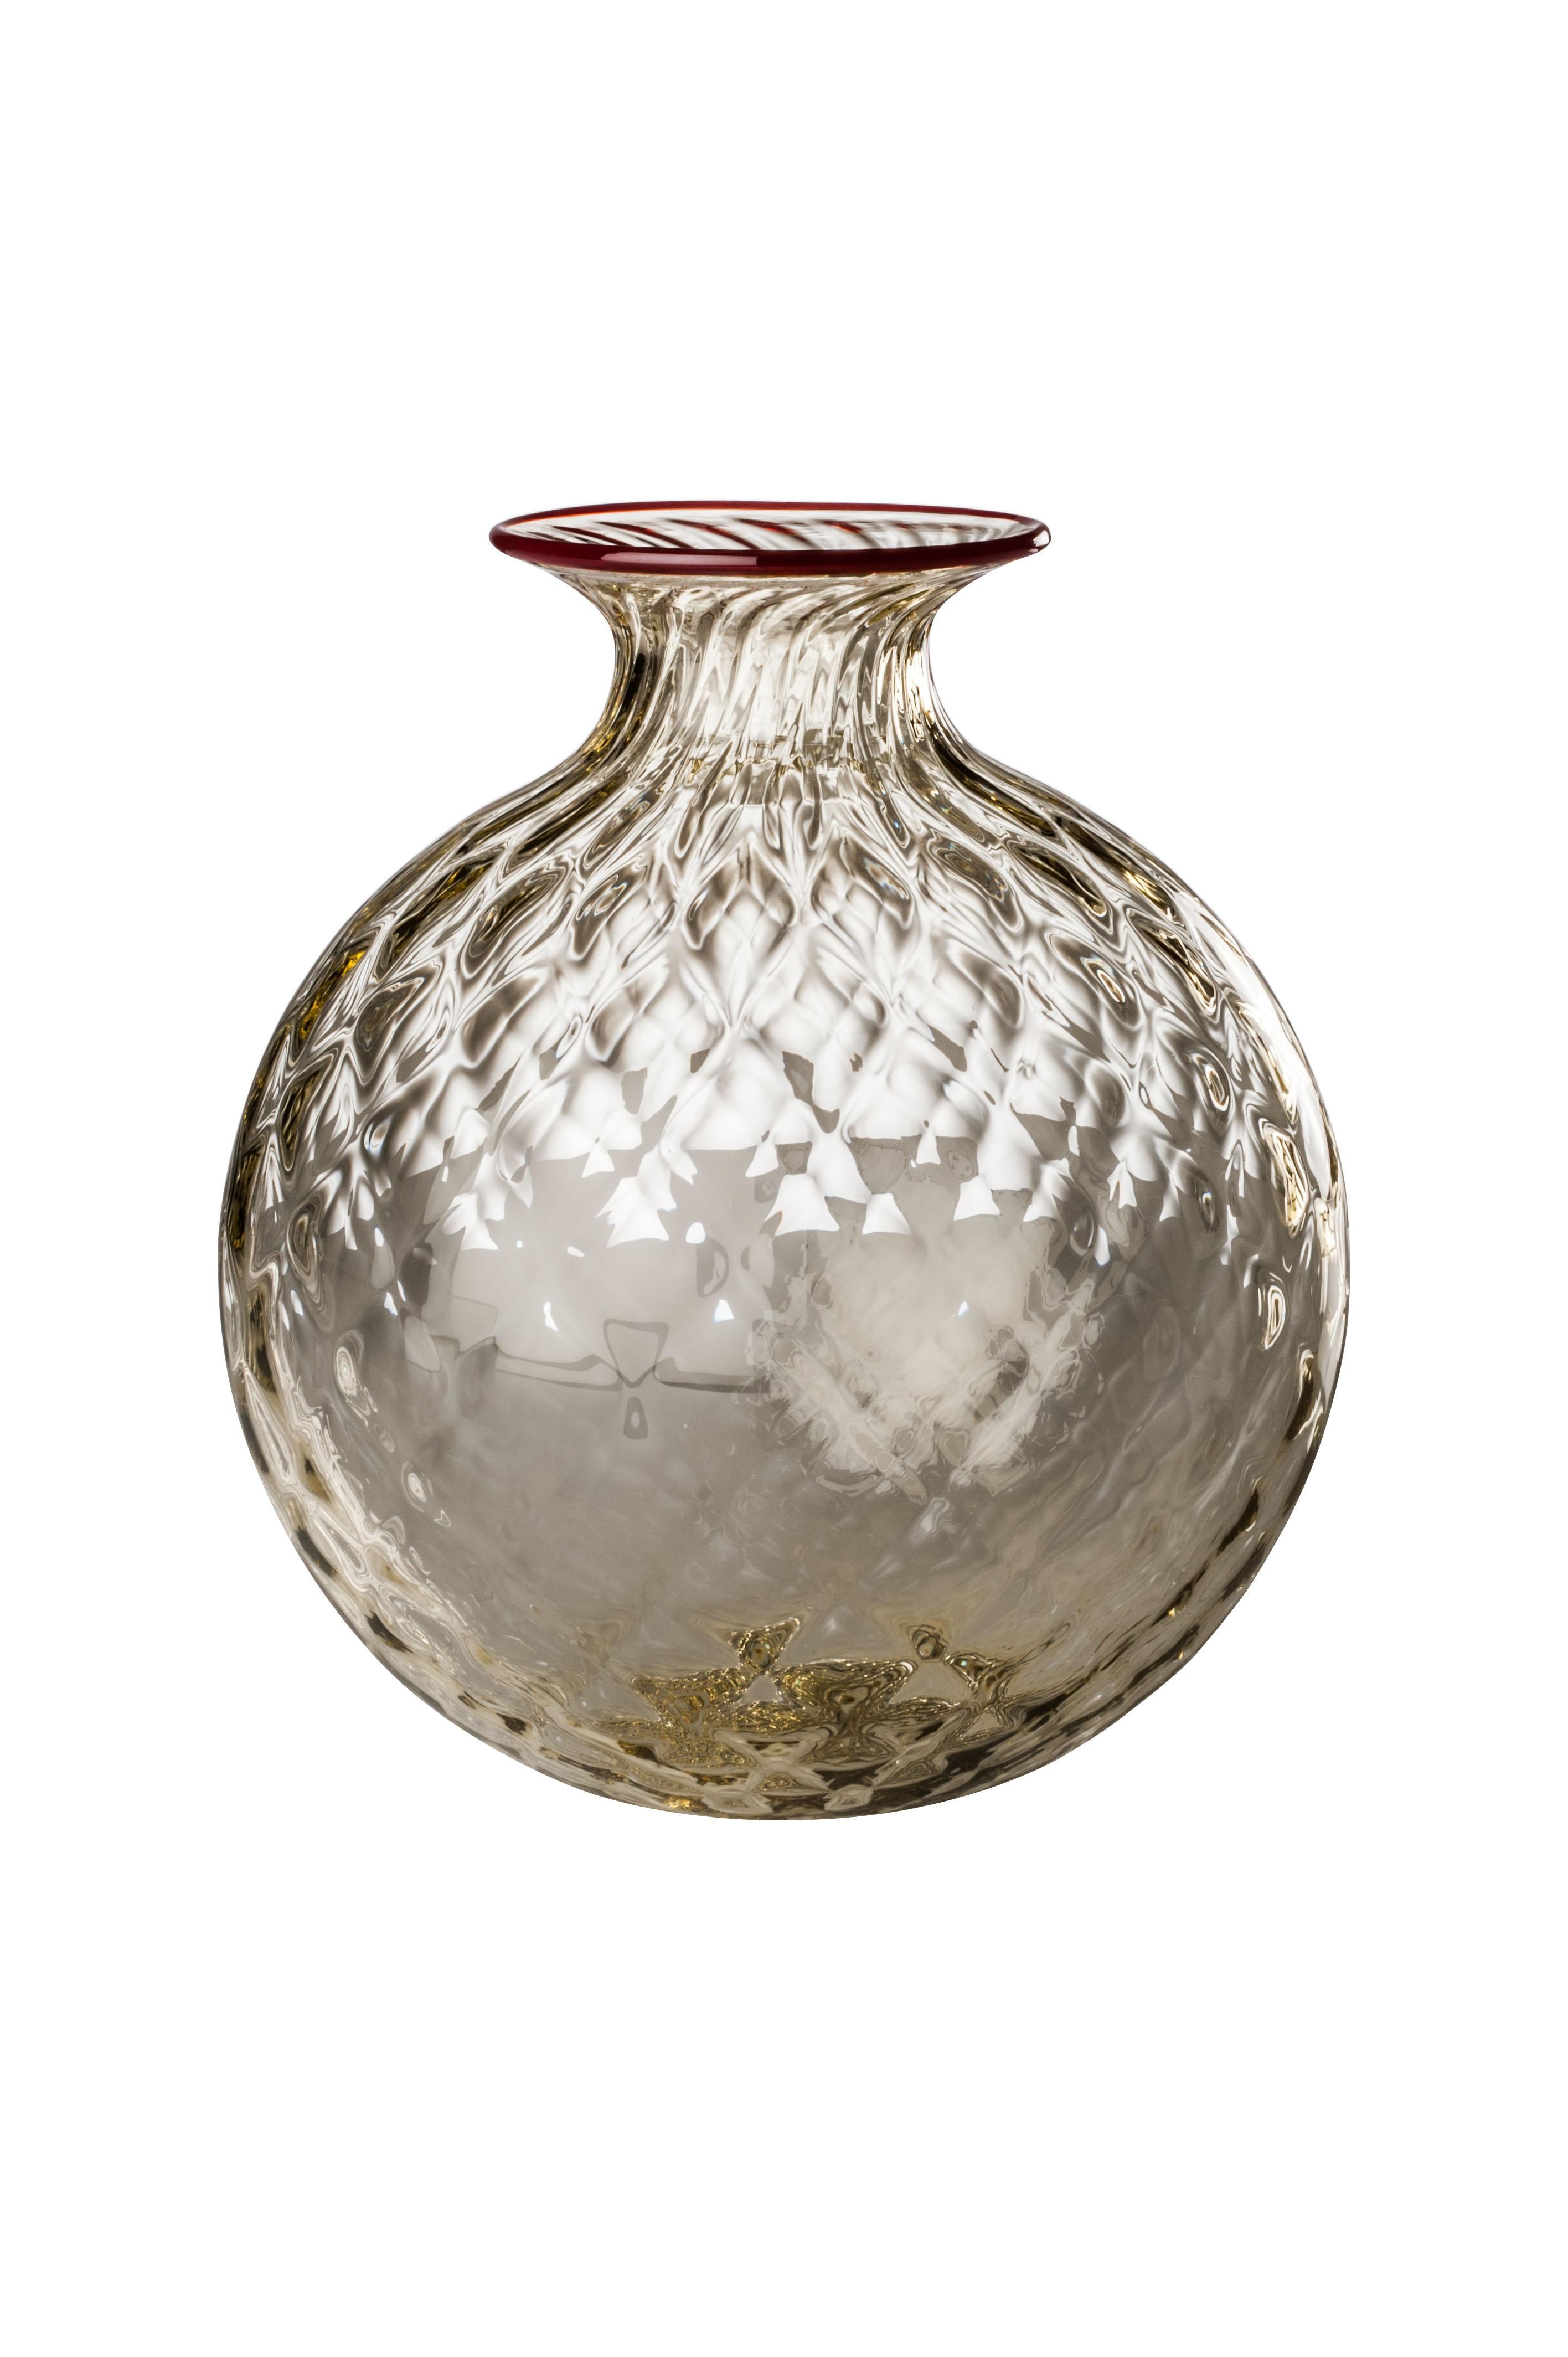 Venini glass vase with full body and textured surface with hexagonal shaped pattern in pale straw designed in 1970. Perfect for indoor home decor as container or strong statement piece for any room. Also available in other colors on 1stdibs. Limited